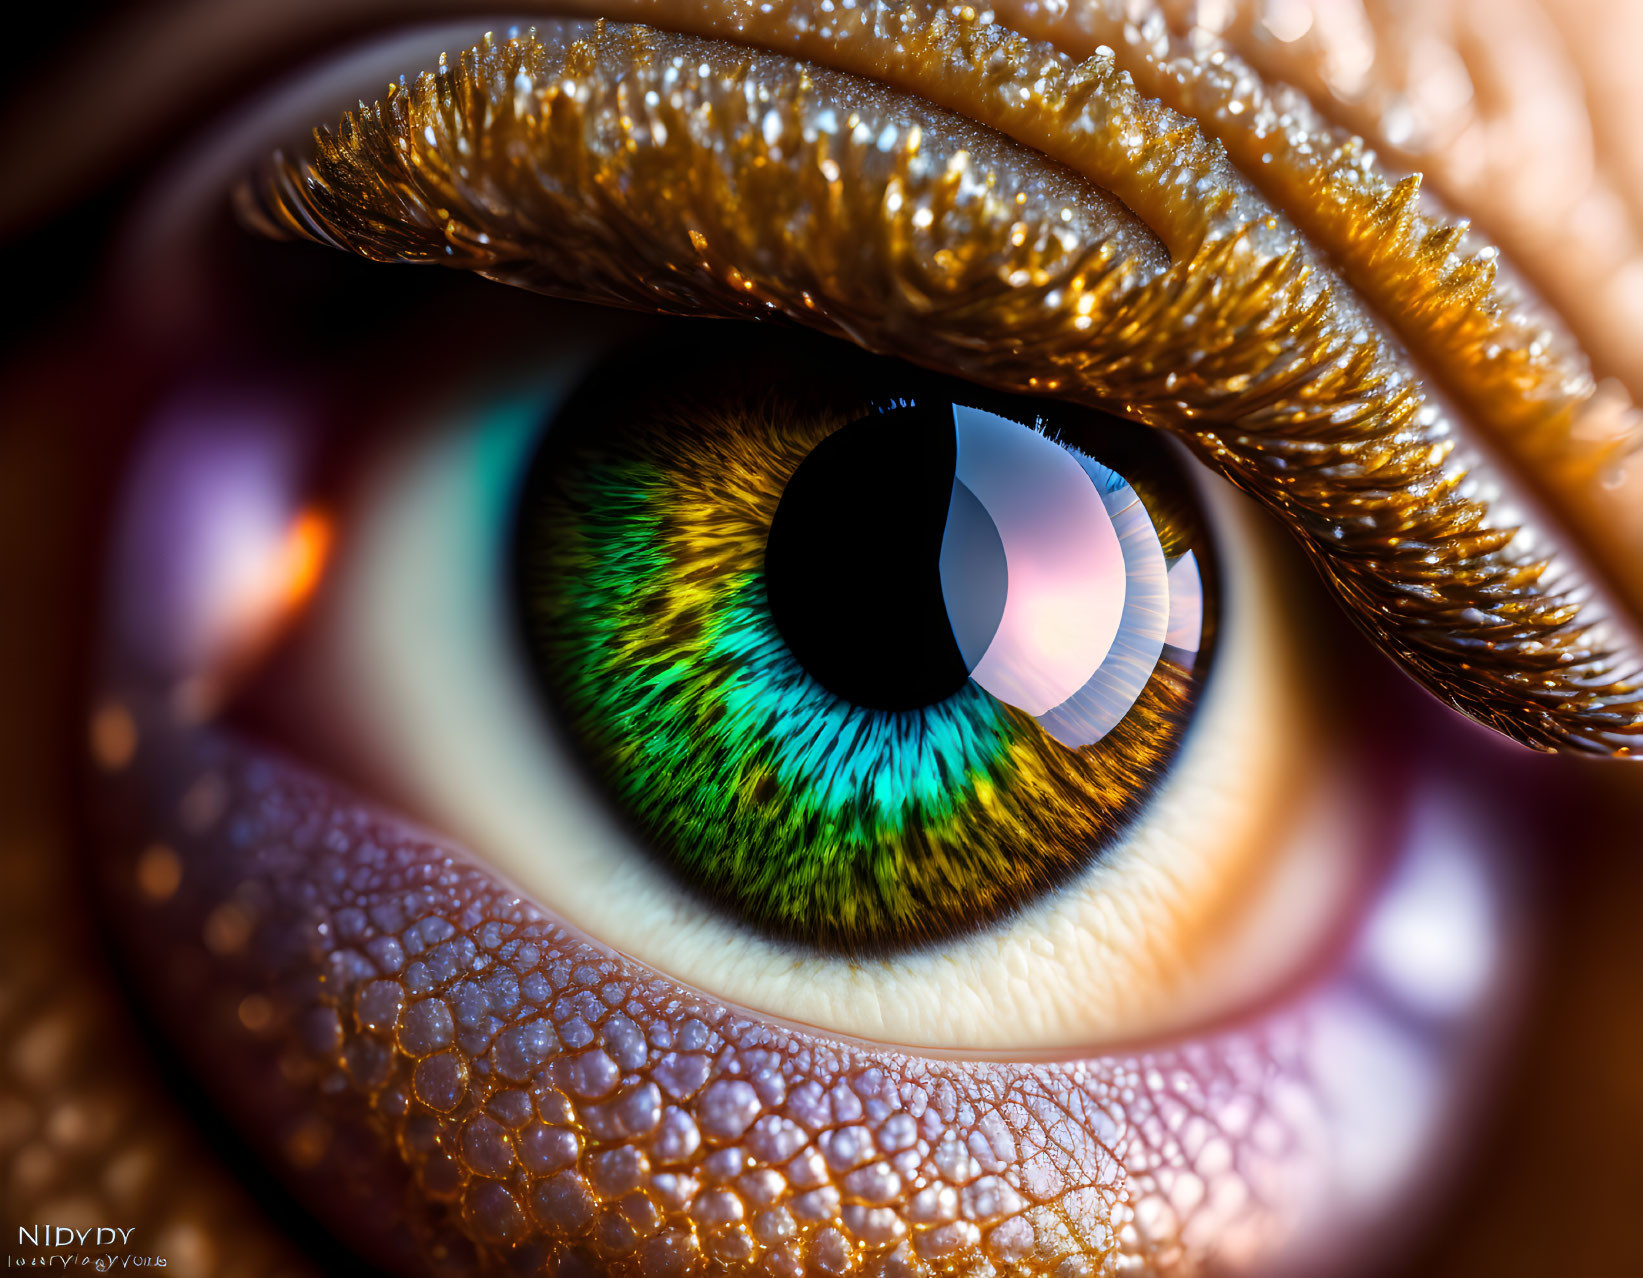 Detailed Close-up of Vibrant Green and Blue Human Eye